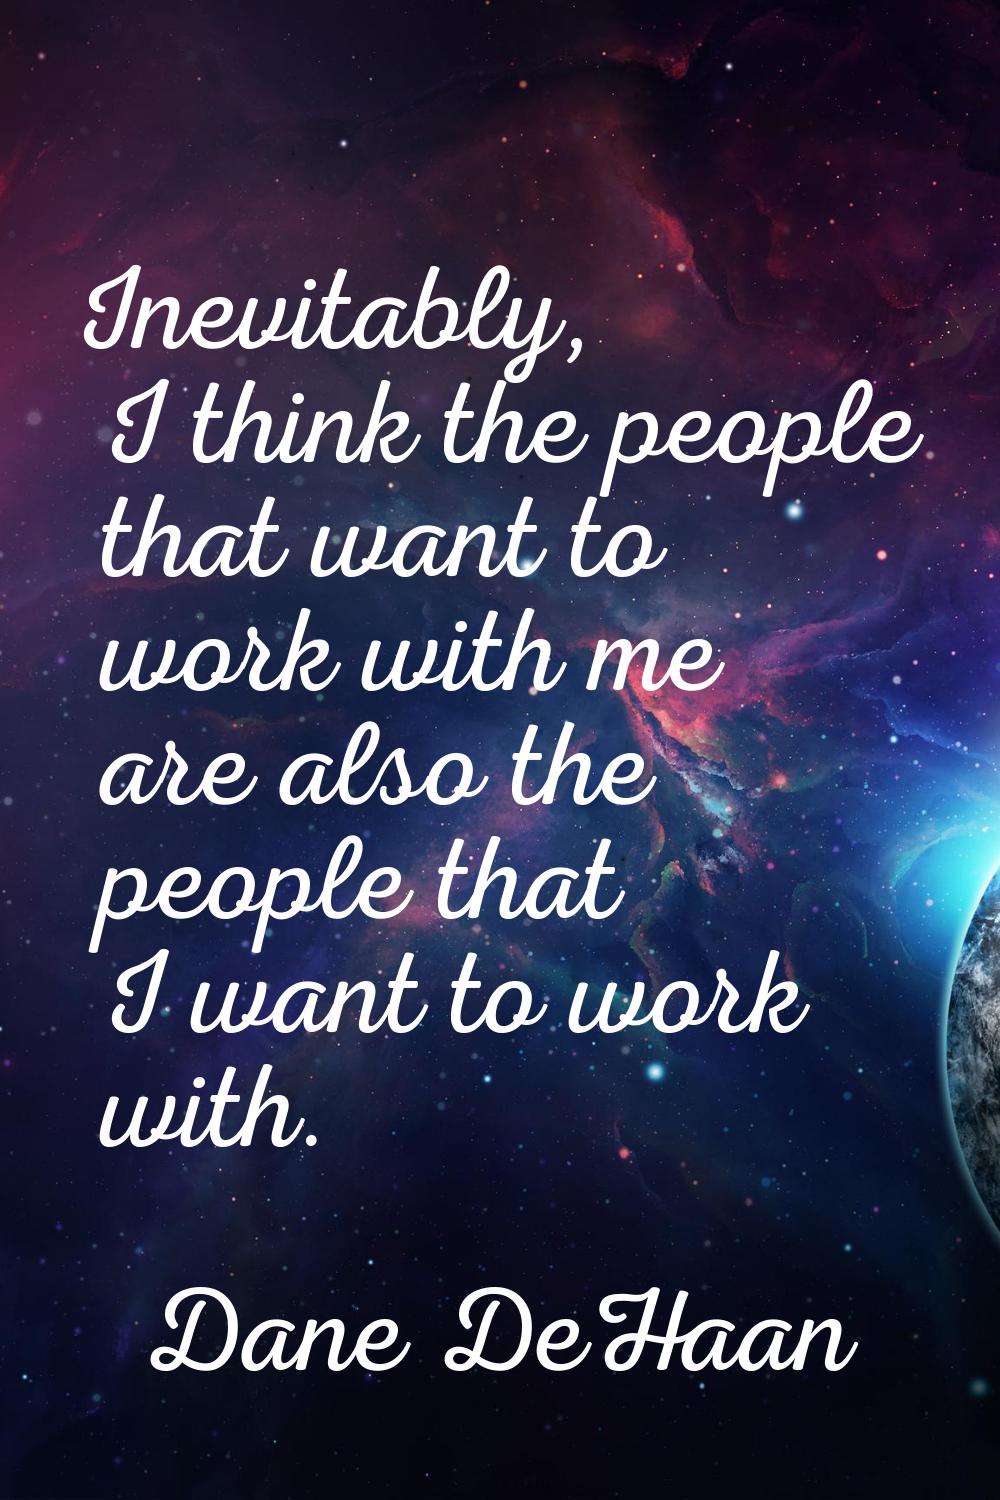 Inevitably, I think the people that want to work with me are also the people that I want to work wi